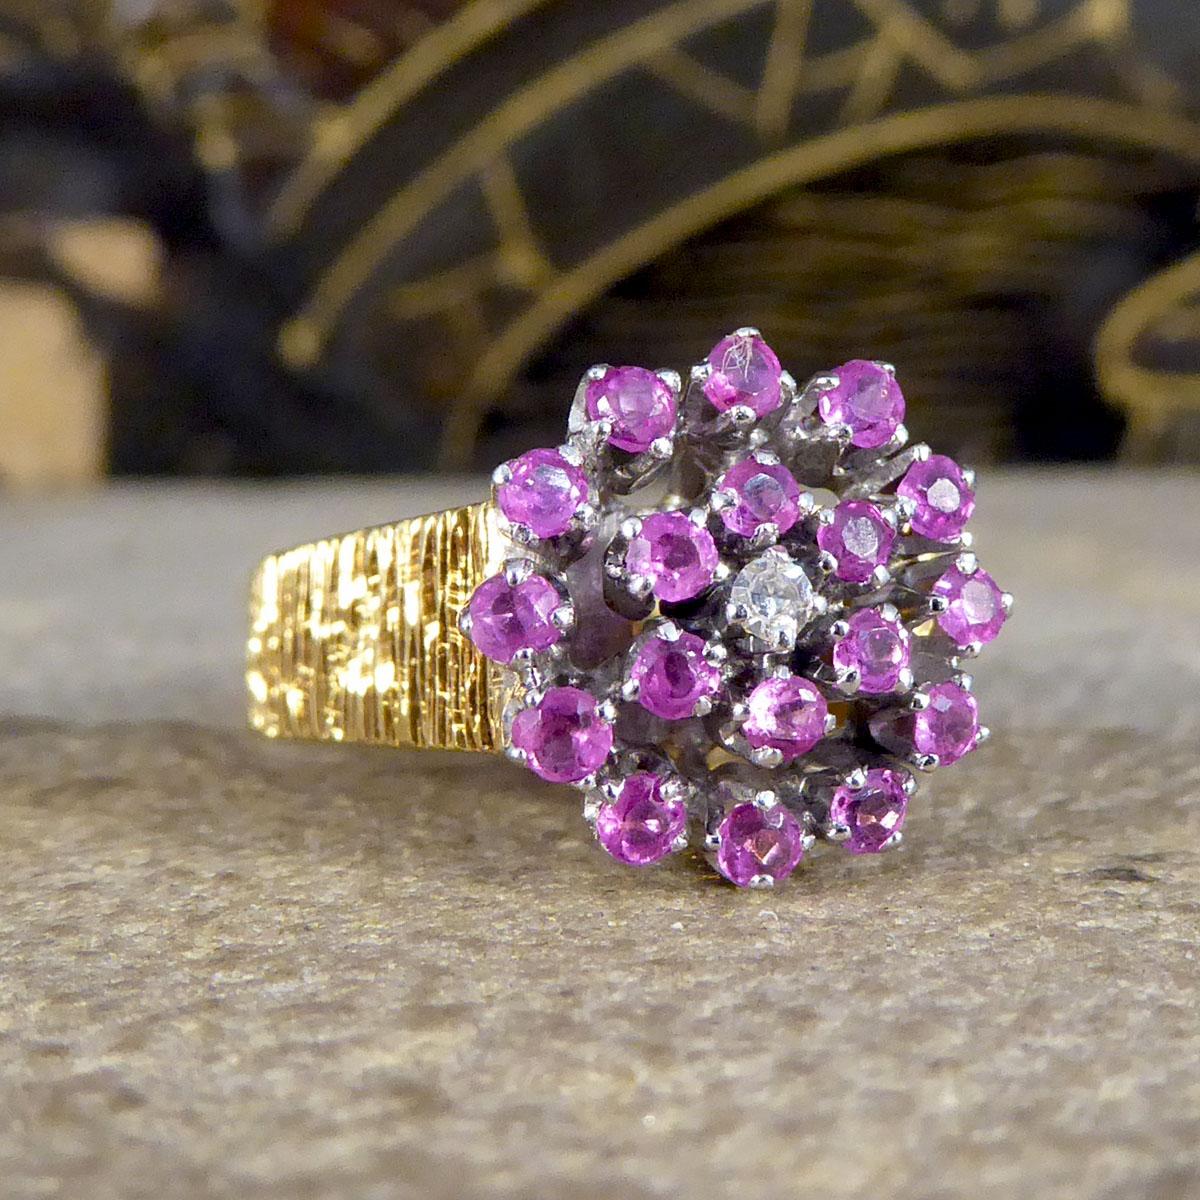 Such a gorgeous classic 1970's designed ring with a bark effect detail around the 18ct Yellow Gold band. The centre of the ring is a small Diamond with two rows of Rubies to cluster in making a flower shape all set in 18ct White Gold. The whole ring